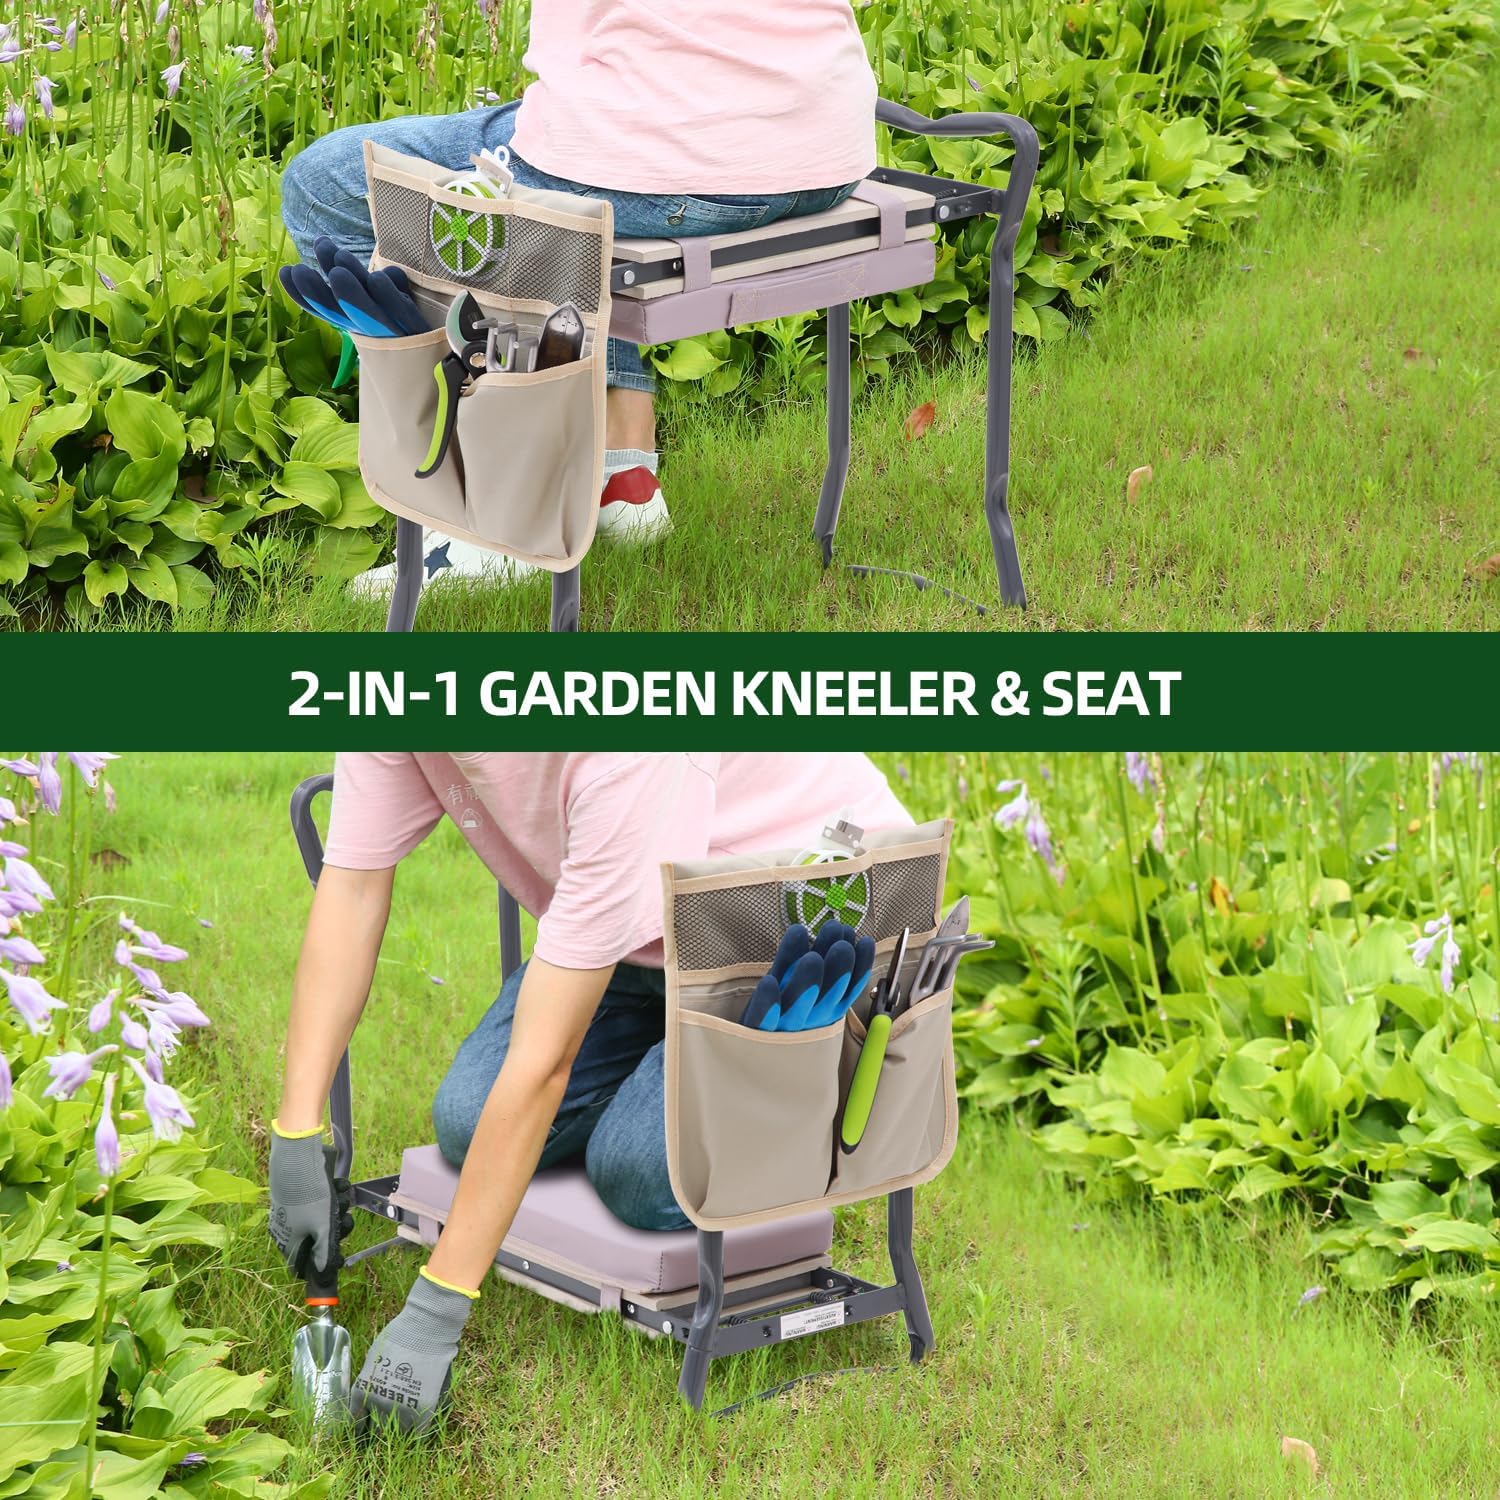 Ohuhu Upgraded Garden Kneeler and Seat 2-in-1 Foldable Gardening Stool with Detachable Soft Kneeling Pad, Garden Bench Heavy Duty with Large Tools Bag and Pouch, Gifts for Women Men Seniors Gardener